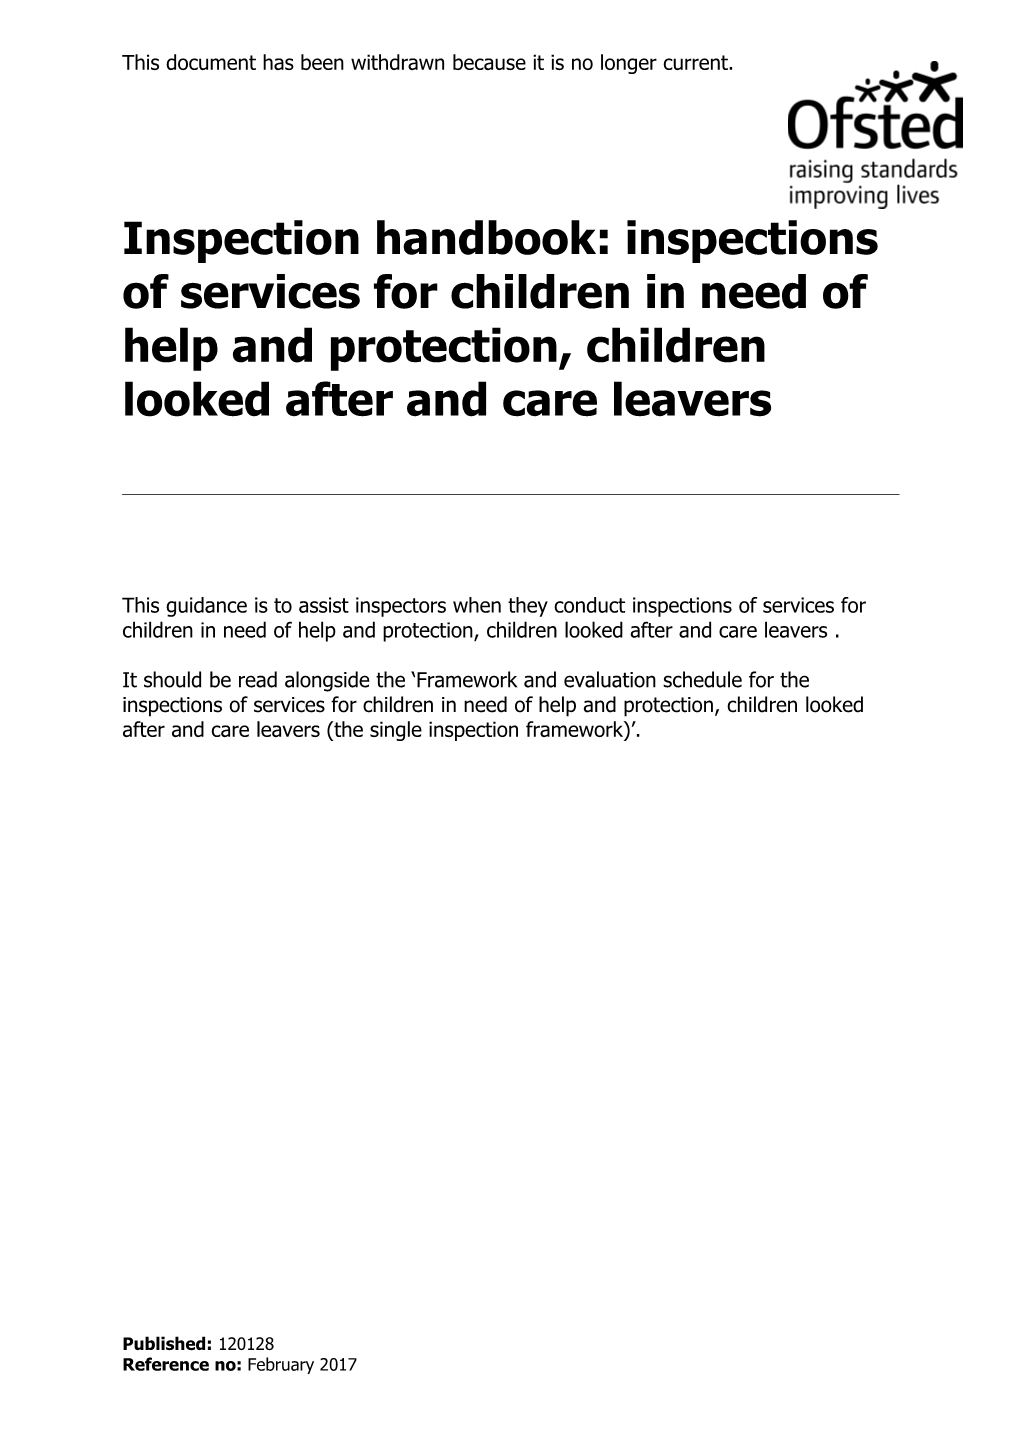 Inspection Handbook: Inspections of Services for Children in Need of Help and Protection